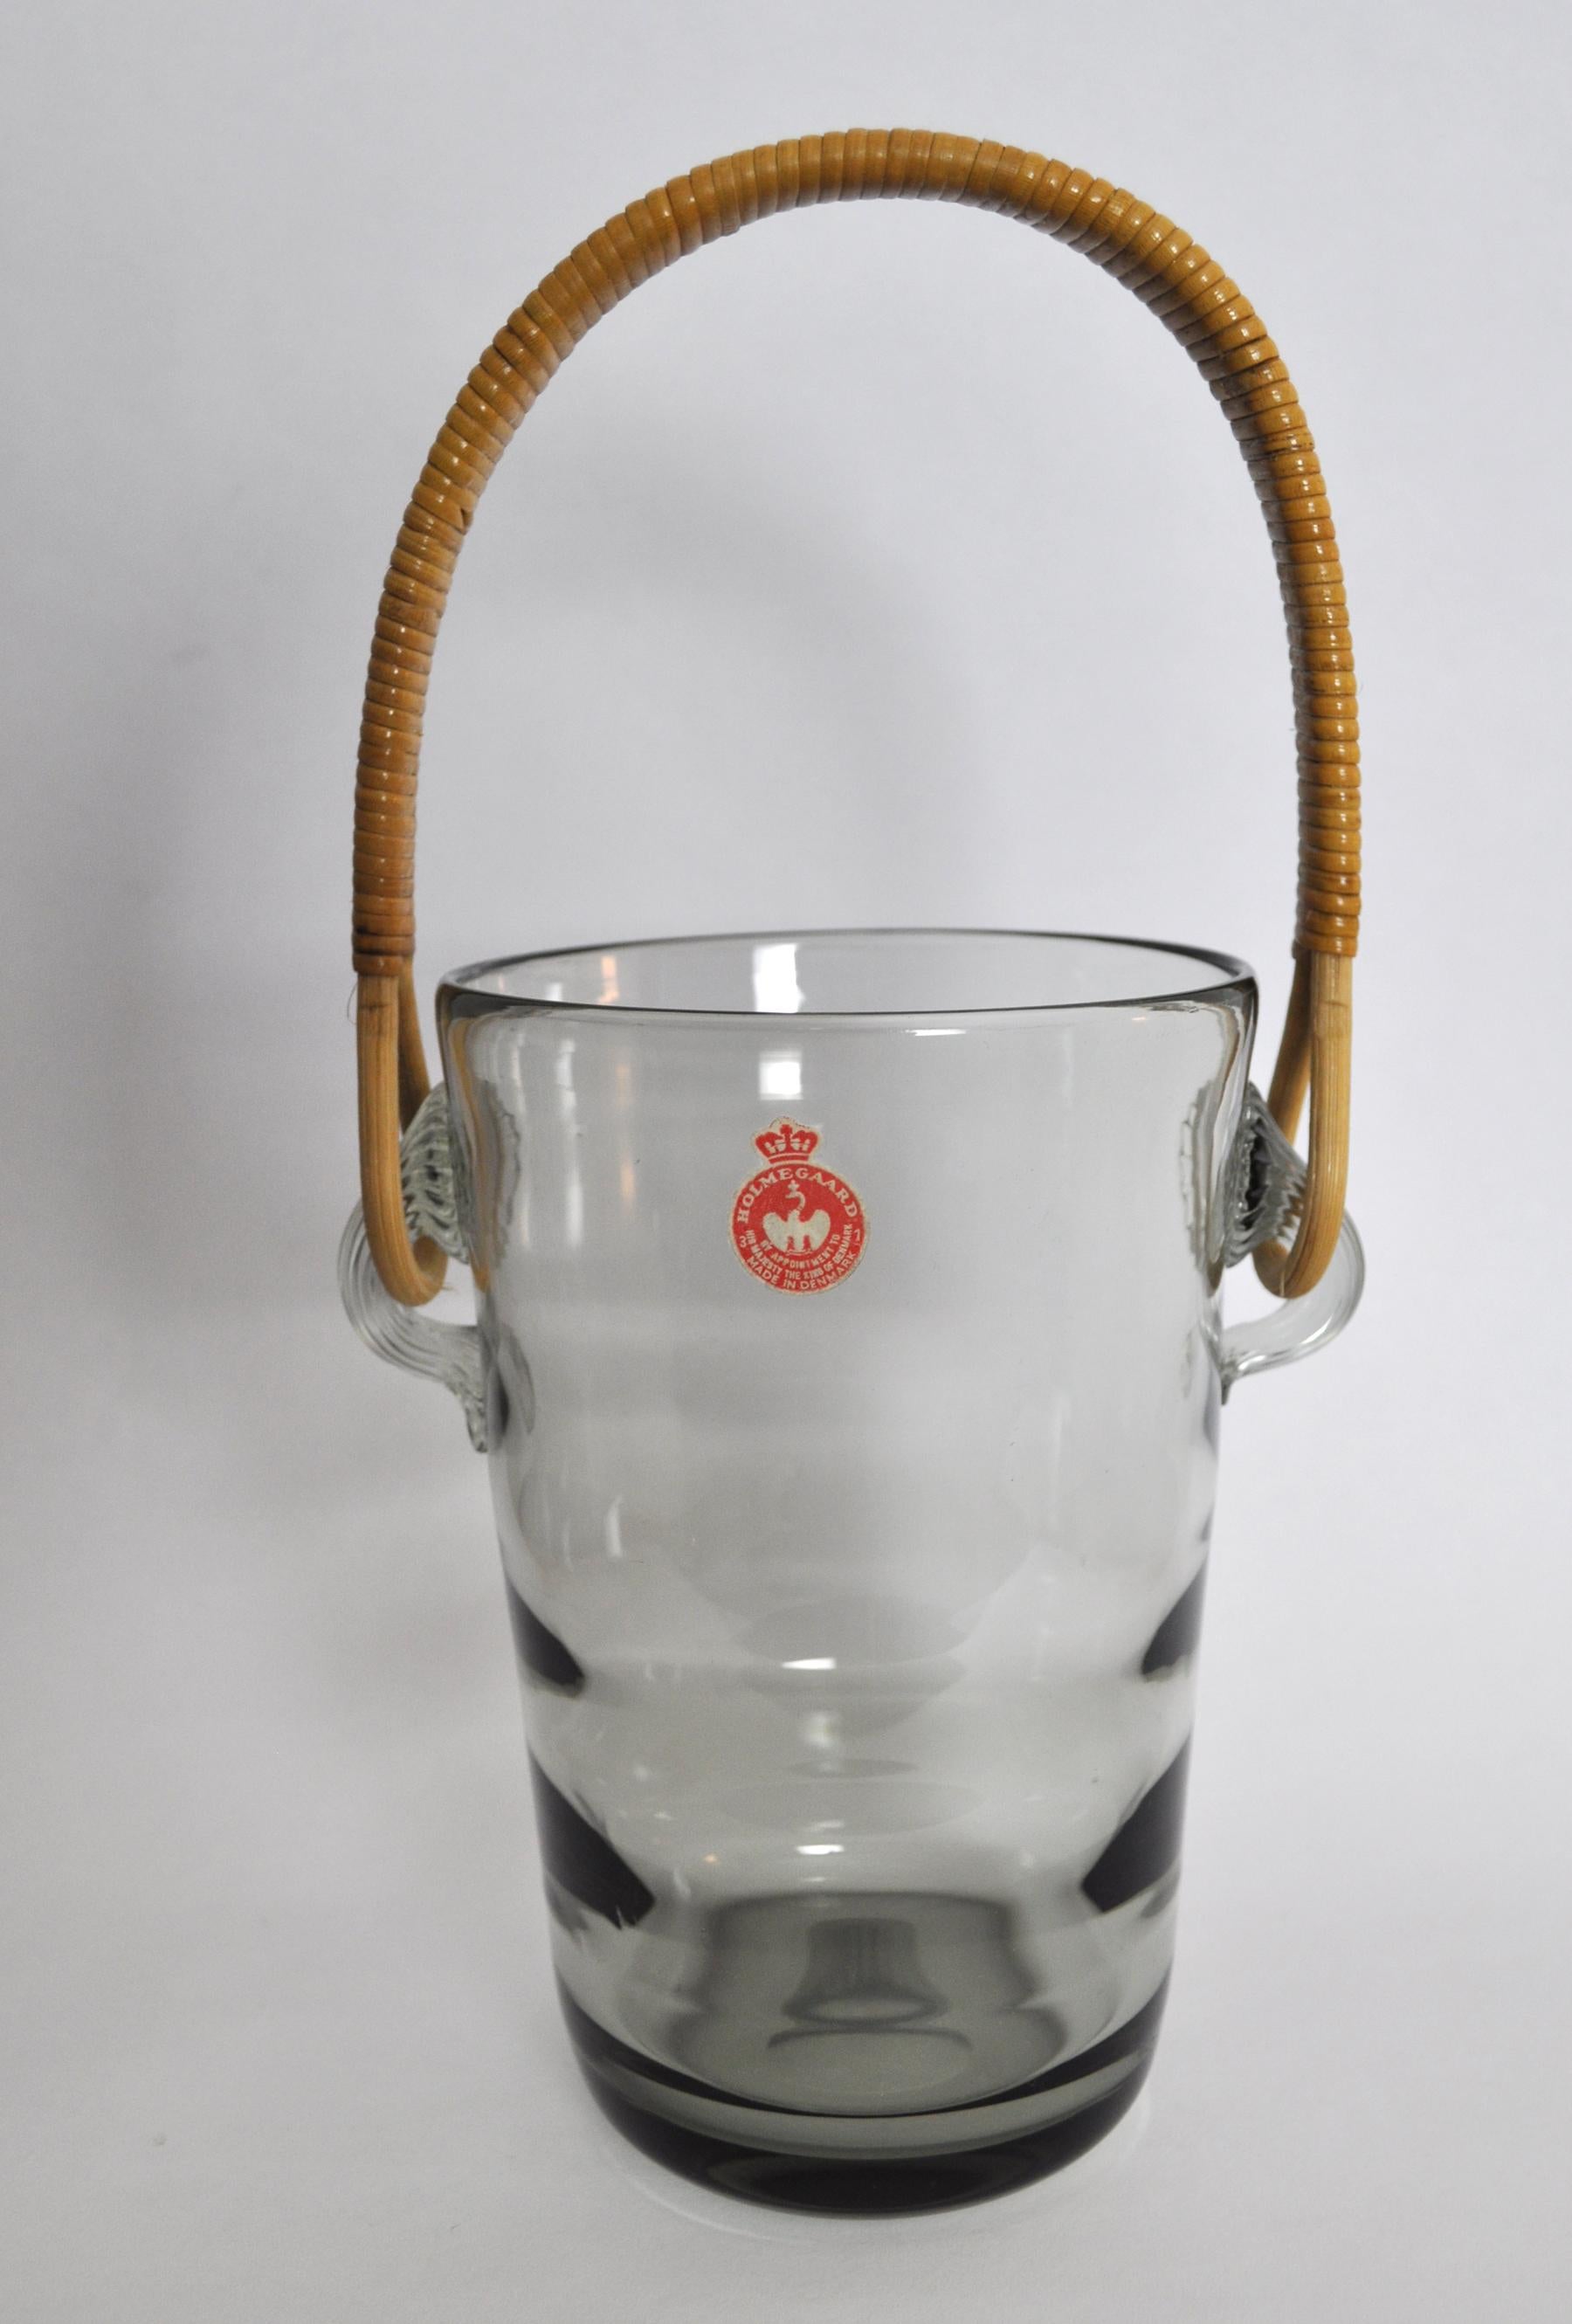 Ice Bucket with Cane Handle Designed by Jacob E. Bang for Holmegaard, 1937 In Good Condition For Sale In Vordingborg, DK